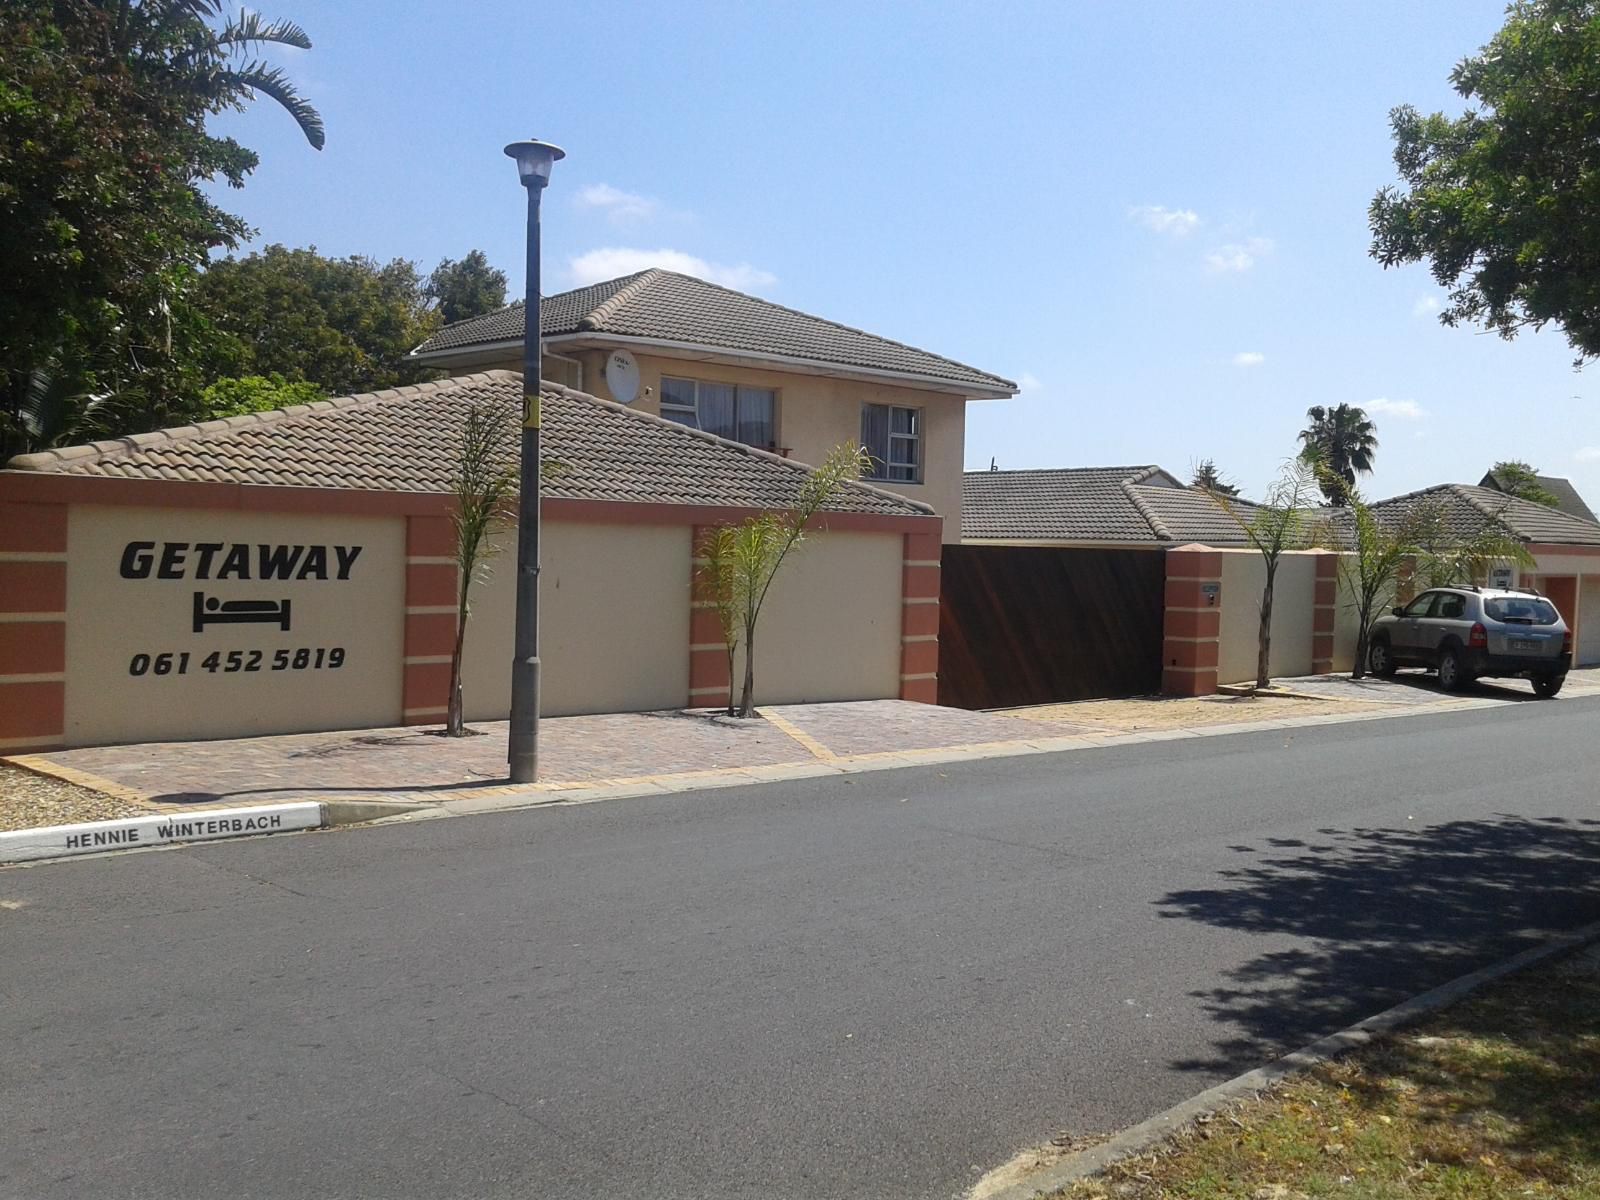 Getaway Self Catering Panorama Panorama Cape Town Western Cape South Africa House, Building, Architecture, Palm Tree, Plant, Nature, Wood, Sign